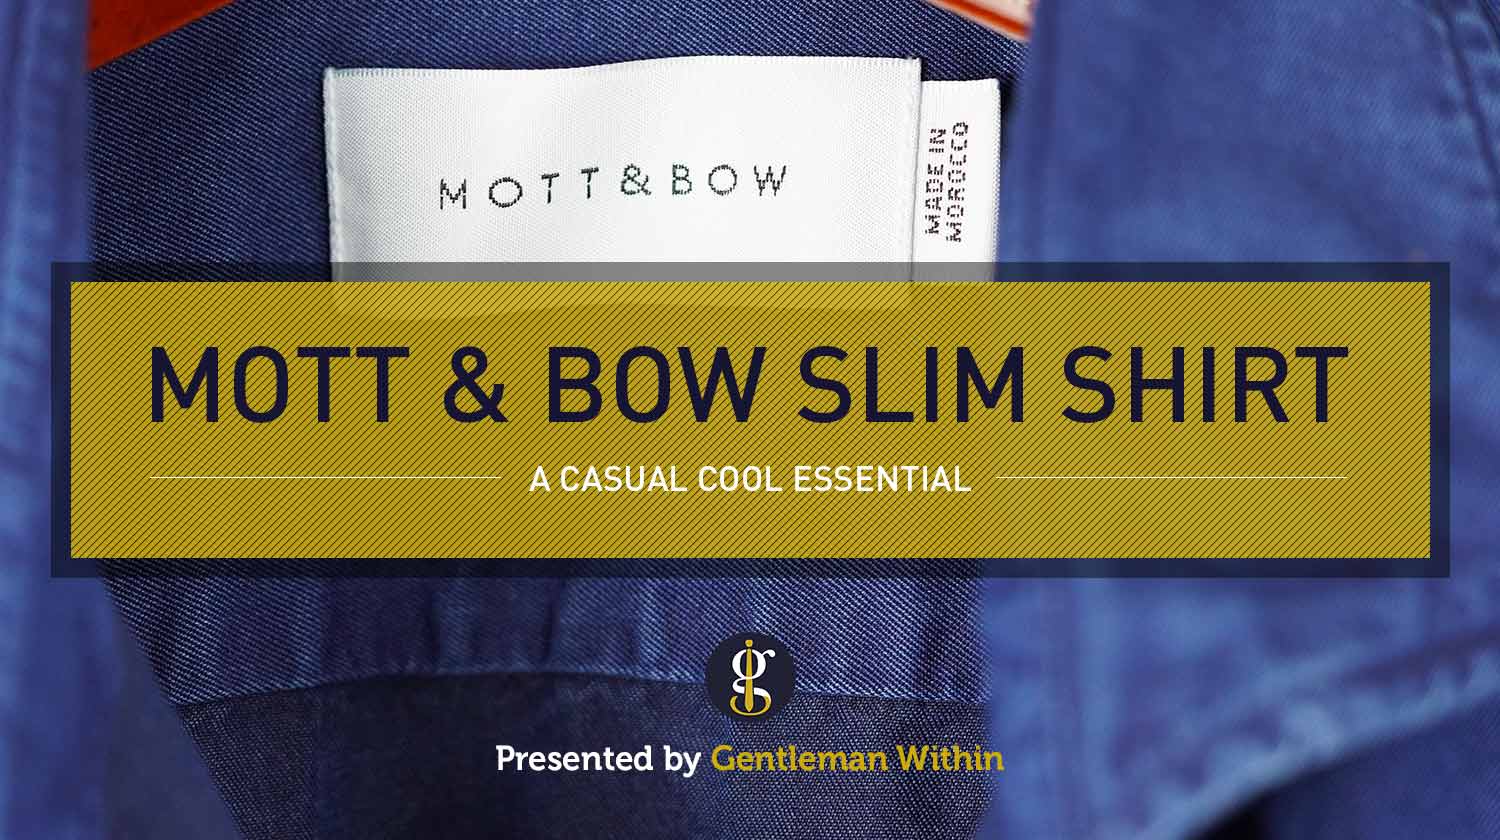 Mott & Bow Button Up Shirt Review: A Casual Cool Essential | GENTLEMAN WITHIN